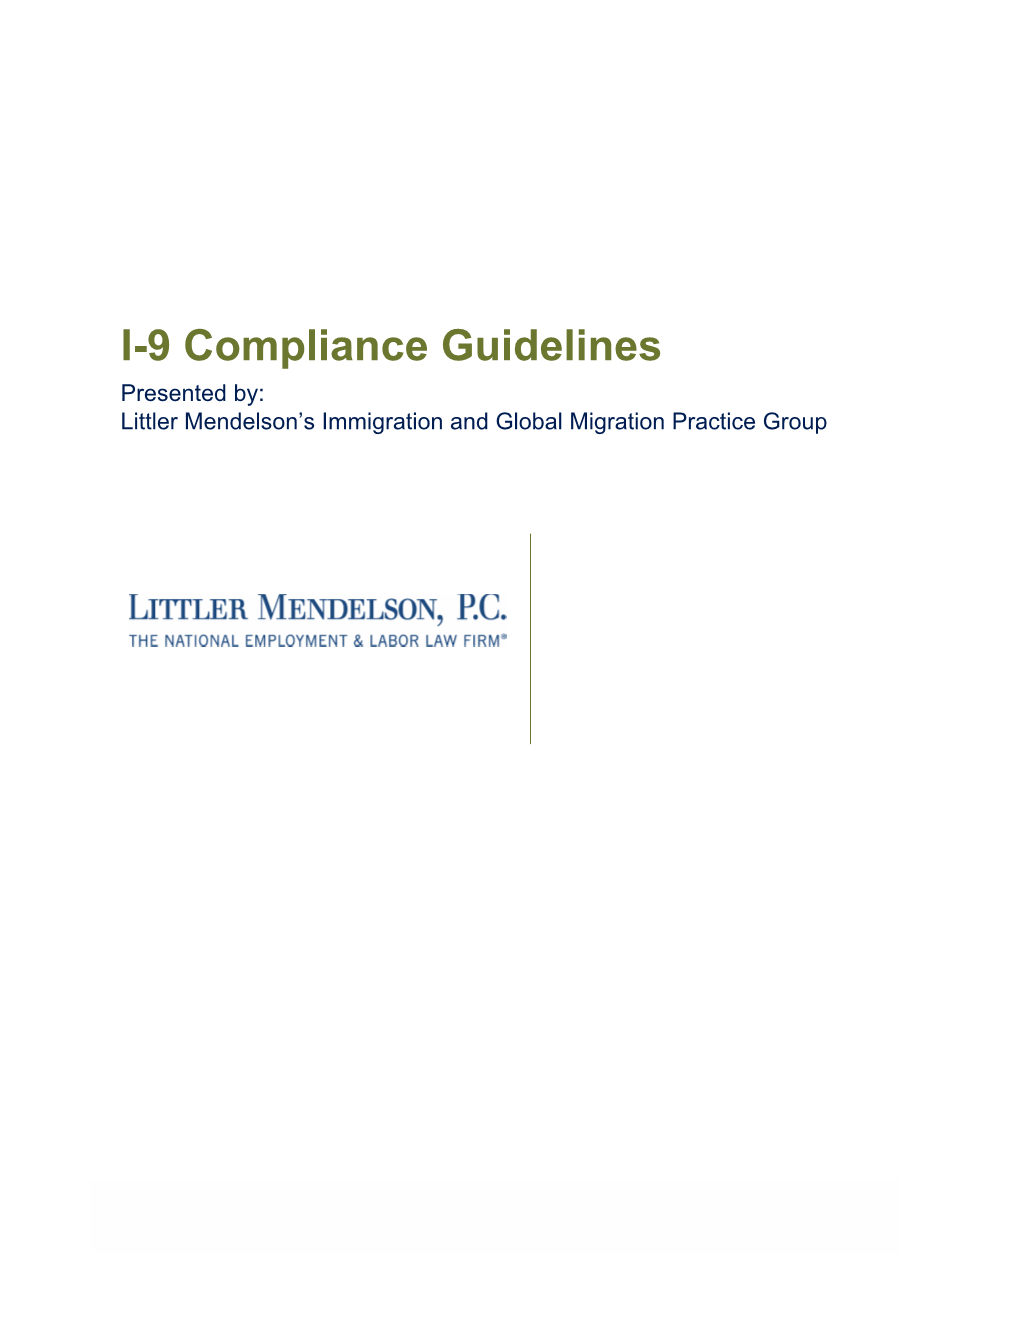 I-9 Compliance Guidelines Presented By: Littler Mendelson’S Immigration and Global Migration Practice Group